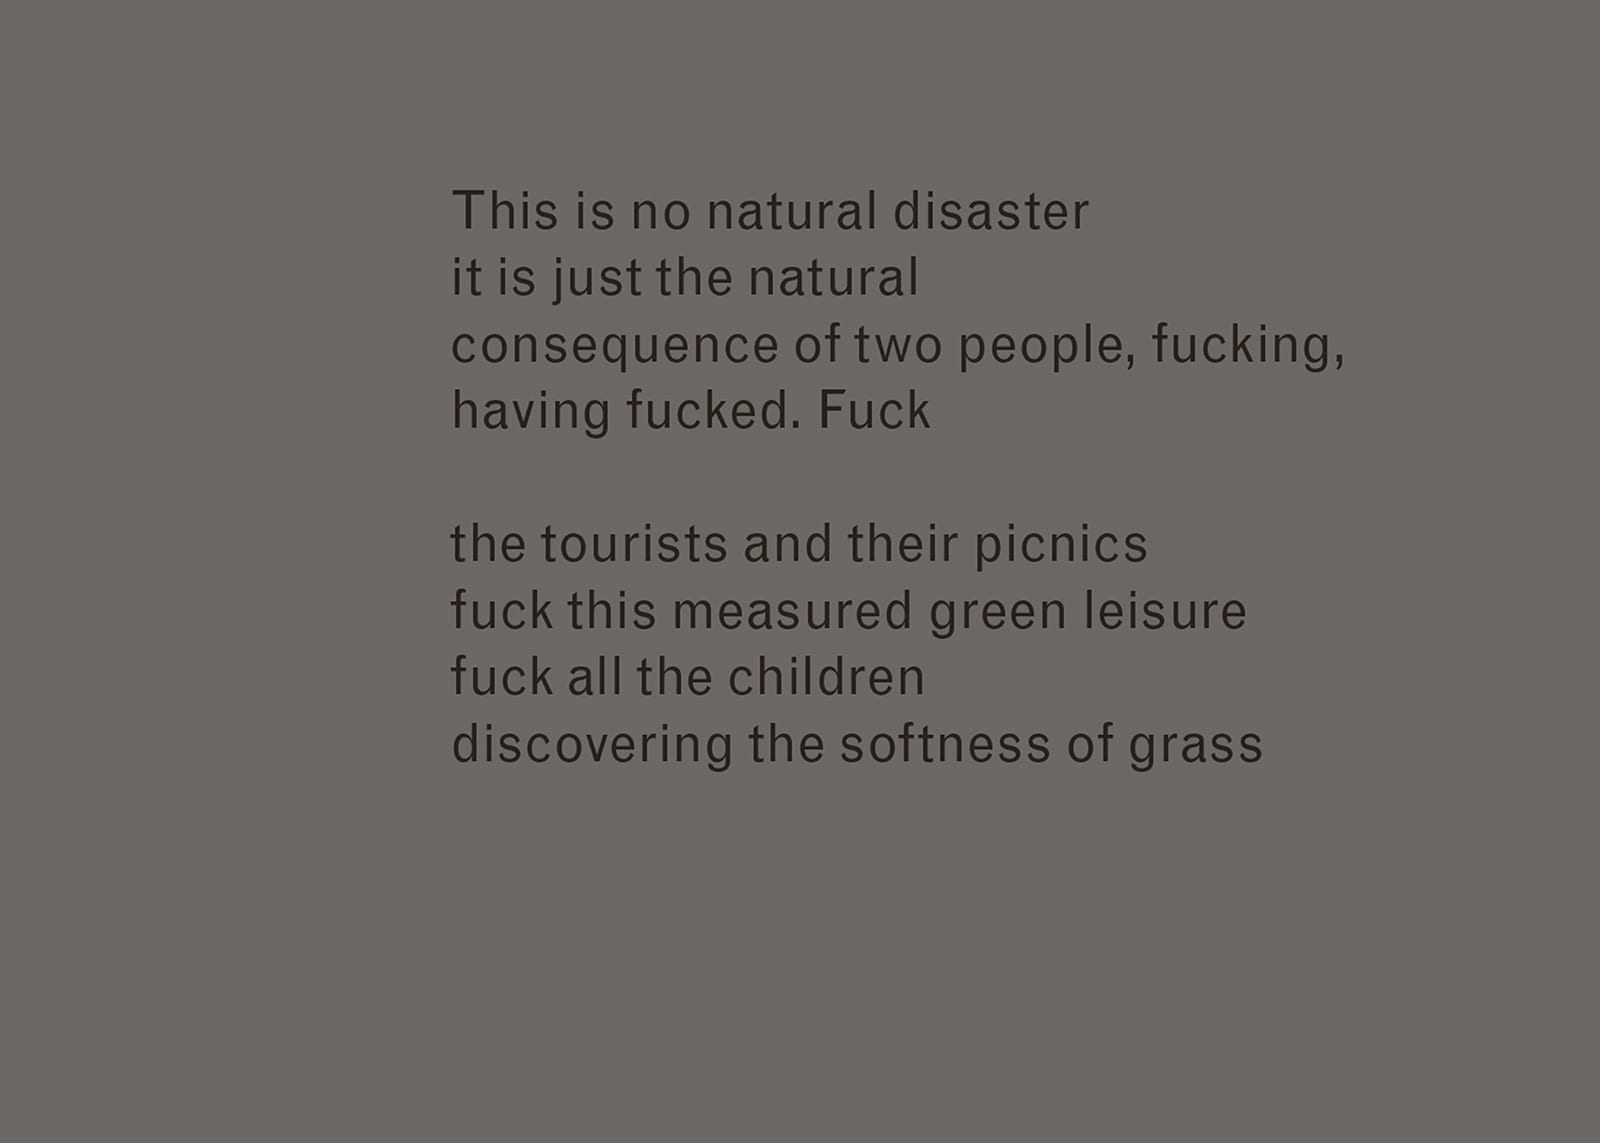 Excerpt of text from Imaginary Explosions. Text reads: This is no natural disaster / it is just the natural / consequence of two people, fucking, / having fucked. Fuck / the tourists and their picnics / fuck this measured green leisure / fuck all the children / discovering the softness of grass